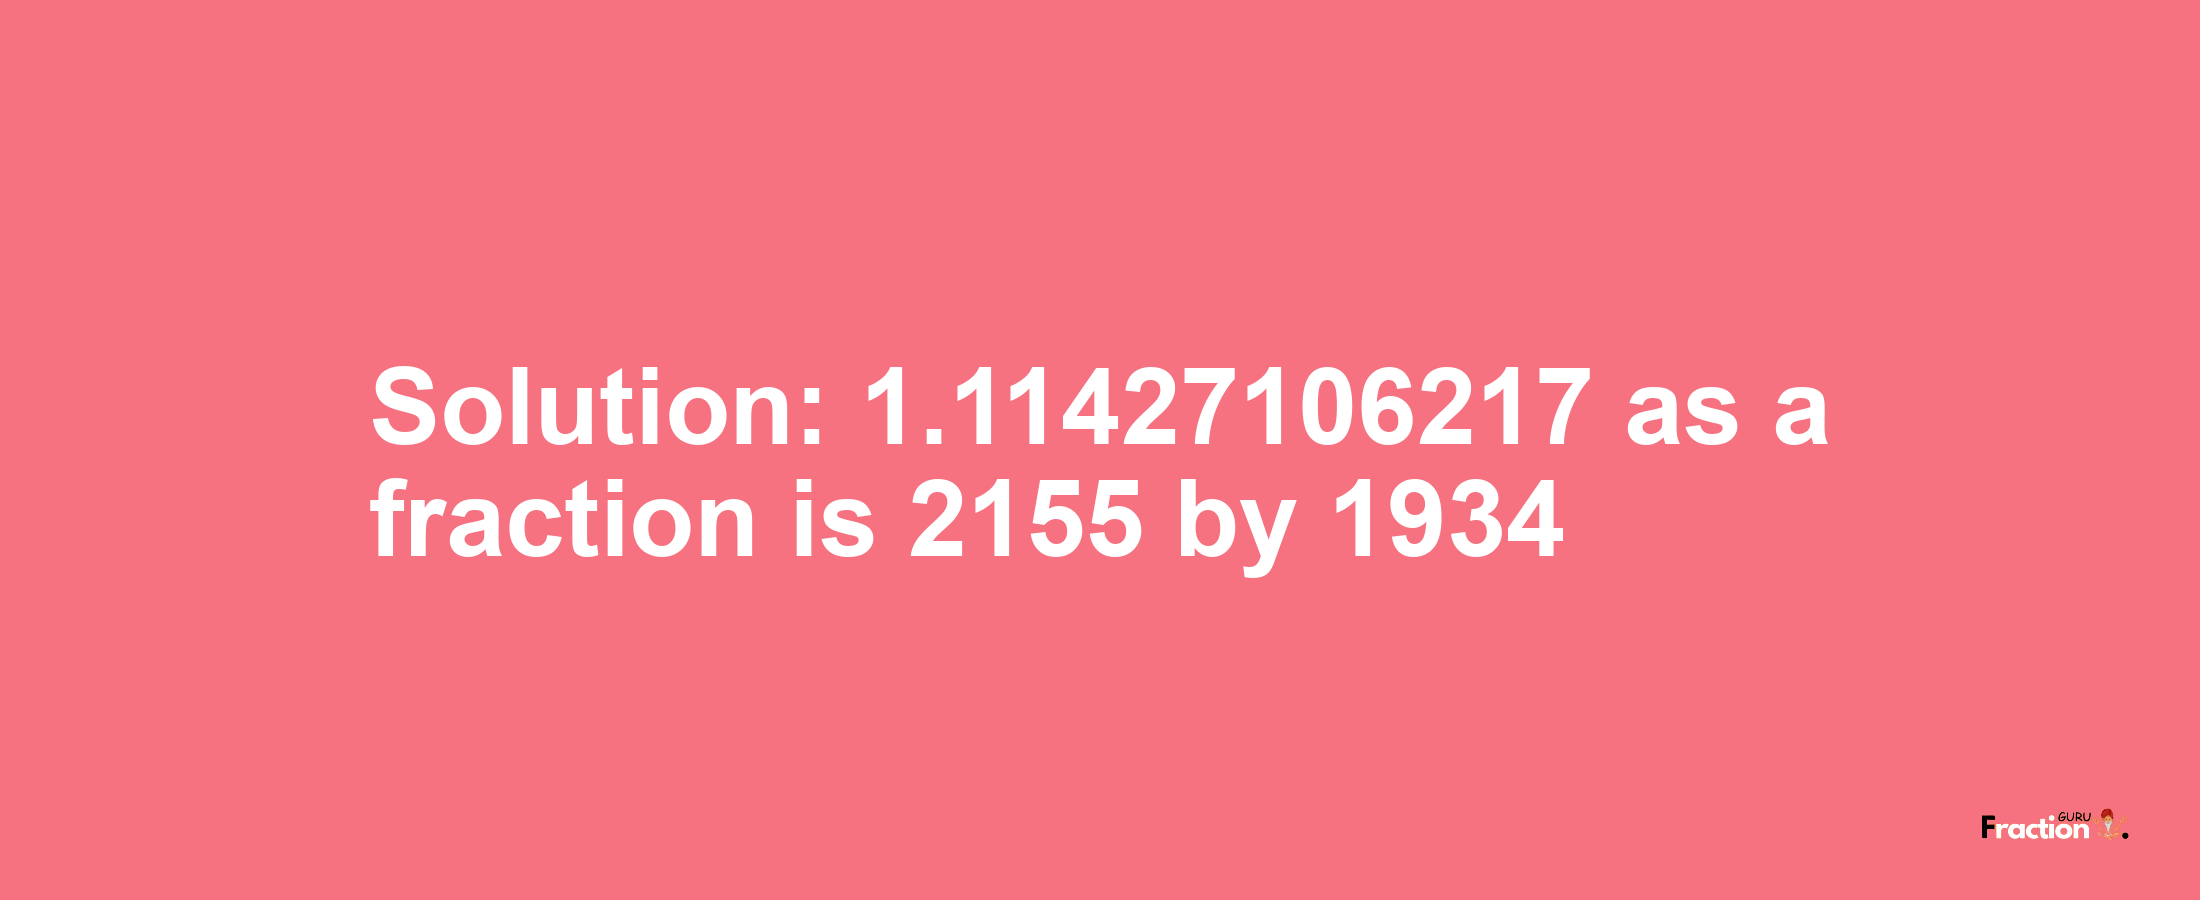 Solution:1.11427106217 as a fraction is 2155/1934